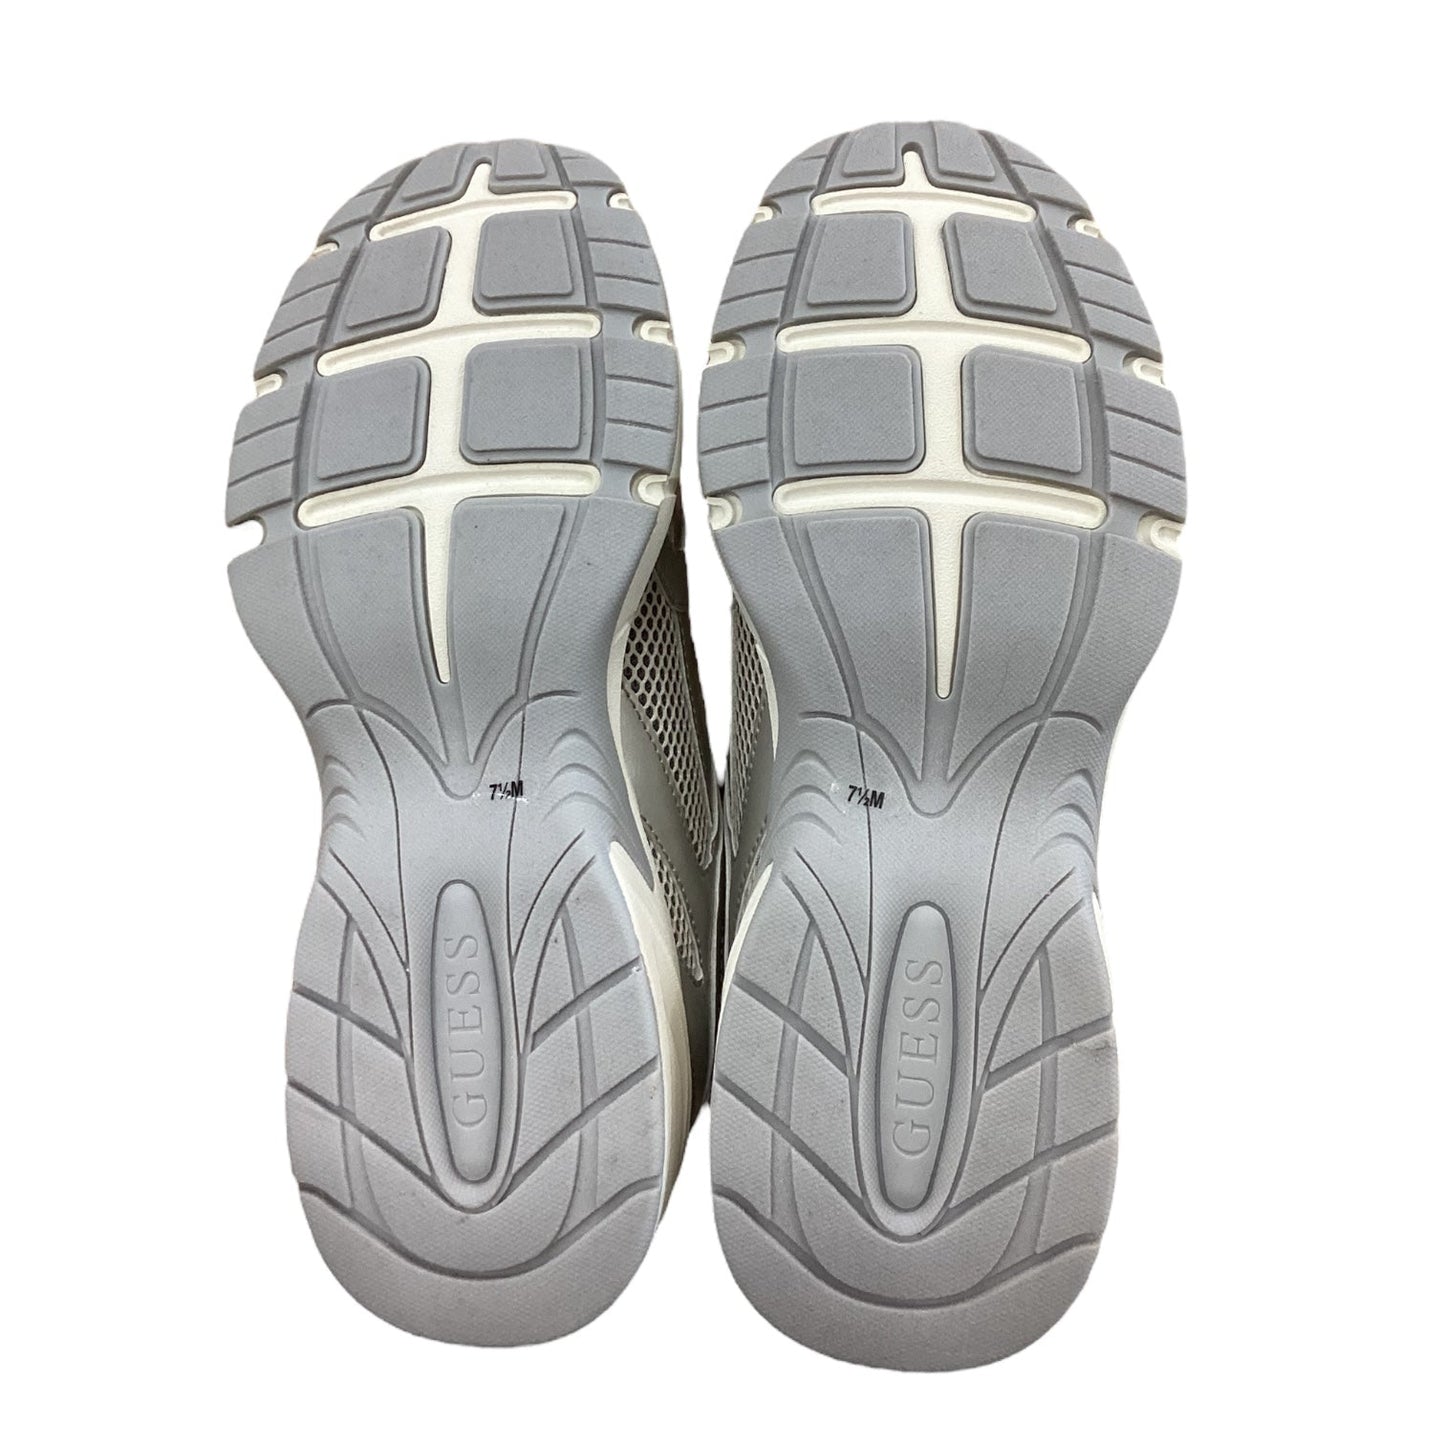 Grey Shoes Athletic Guess, Size 7.5